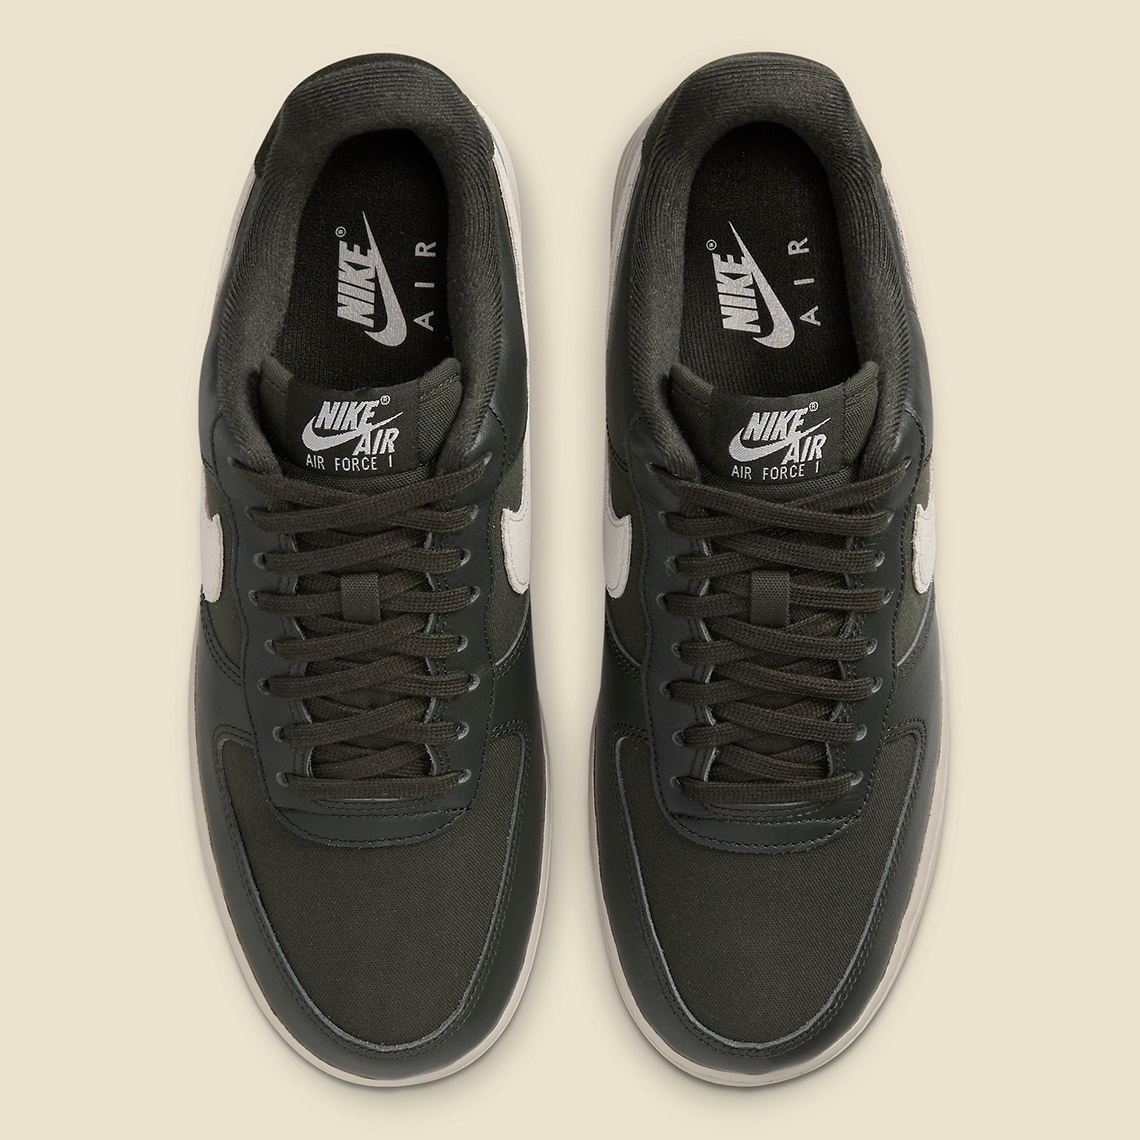 Nike Air Force 1 Low Sequoia Dv7186 301 Release Date 8